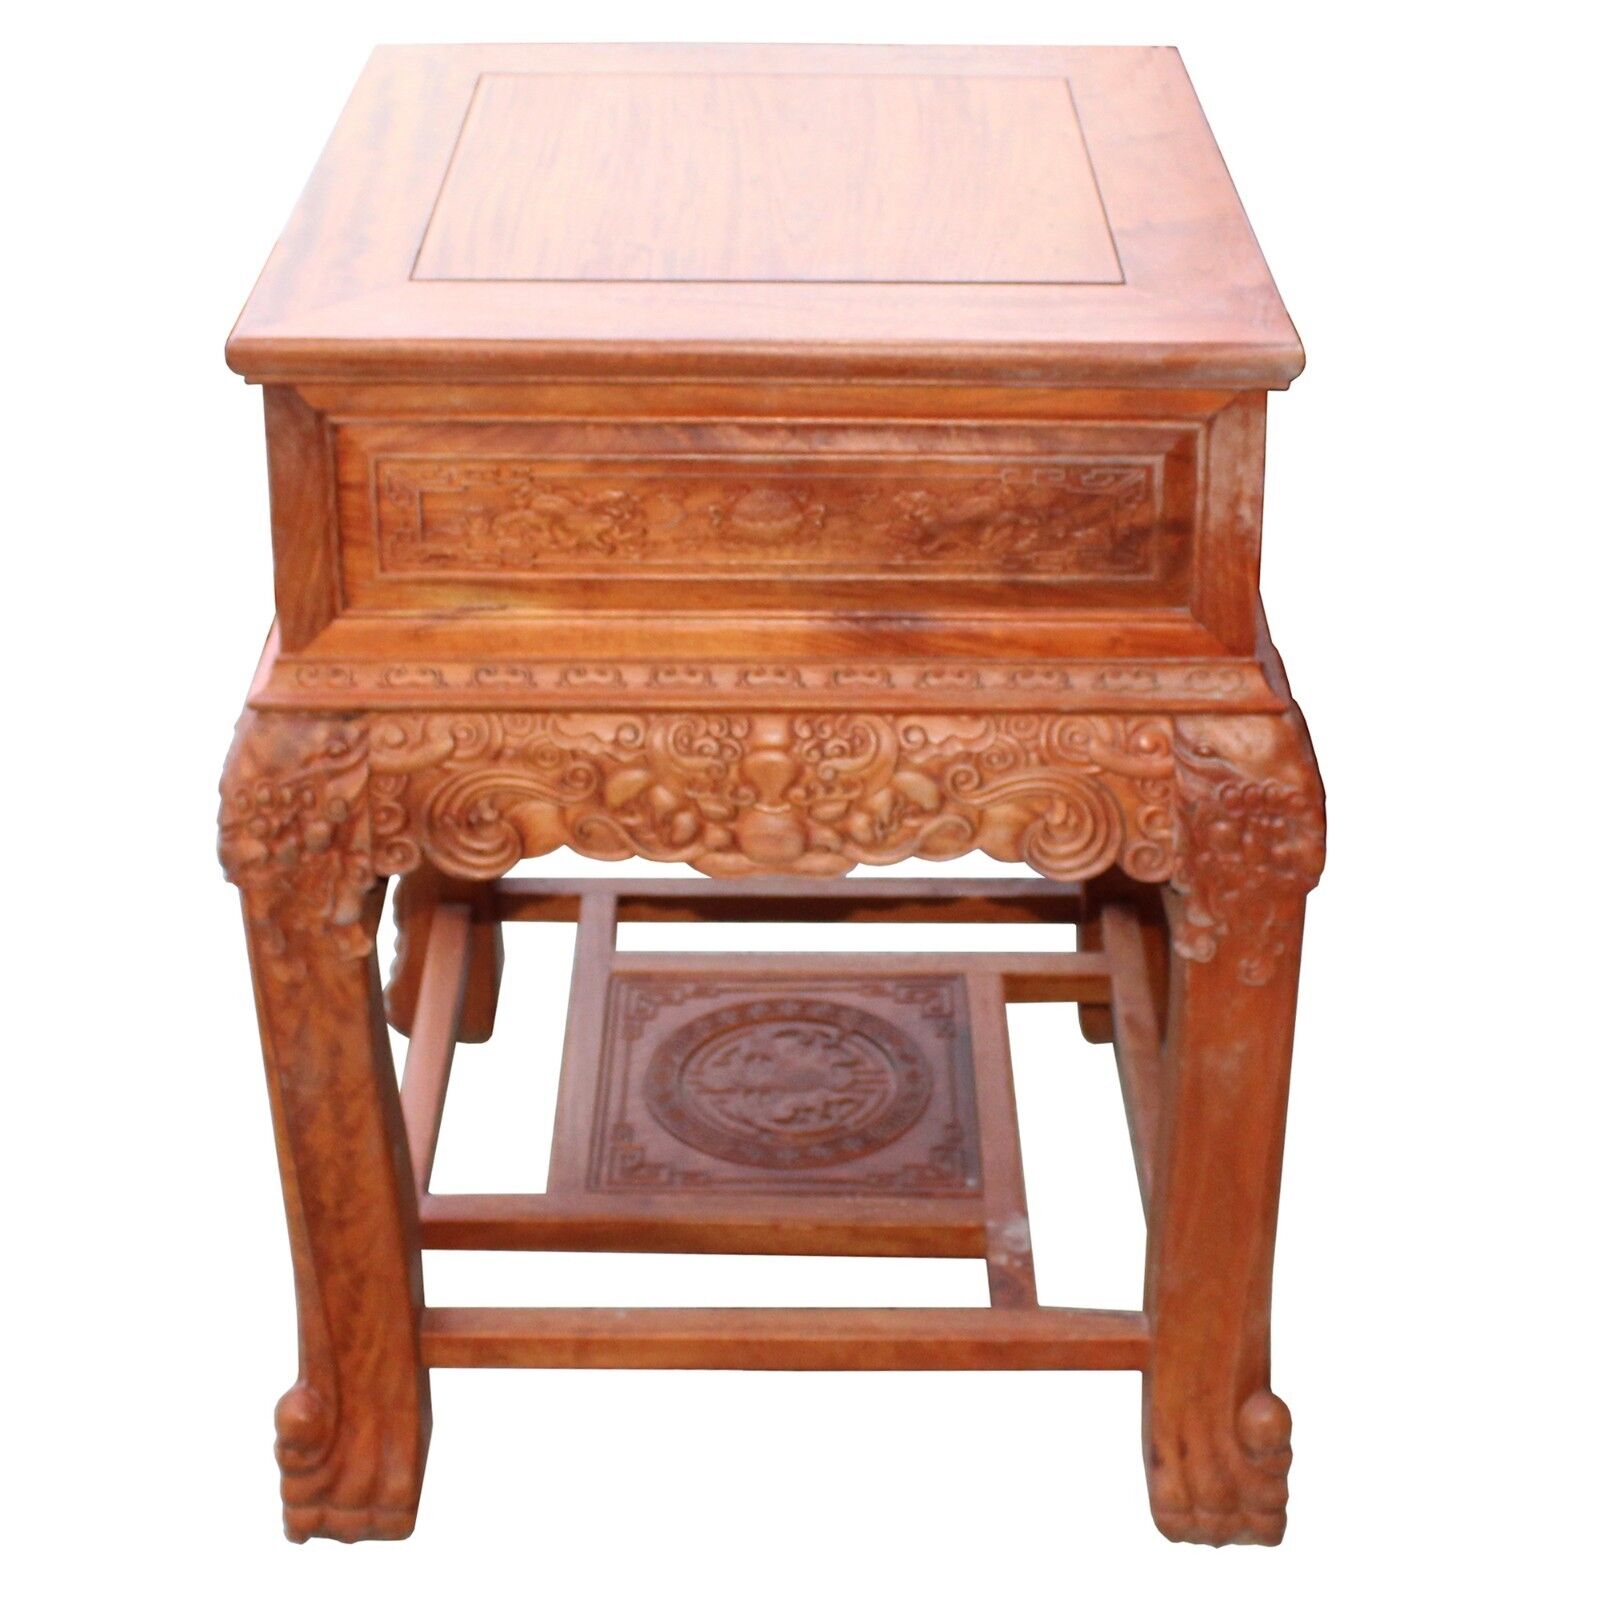 Chinese Oriental Huali Rosewood Foo Dogs Motif Tea Table Stand cs4529 Handmade Does Not Apply - фотография #2